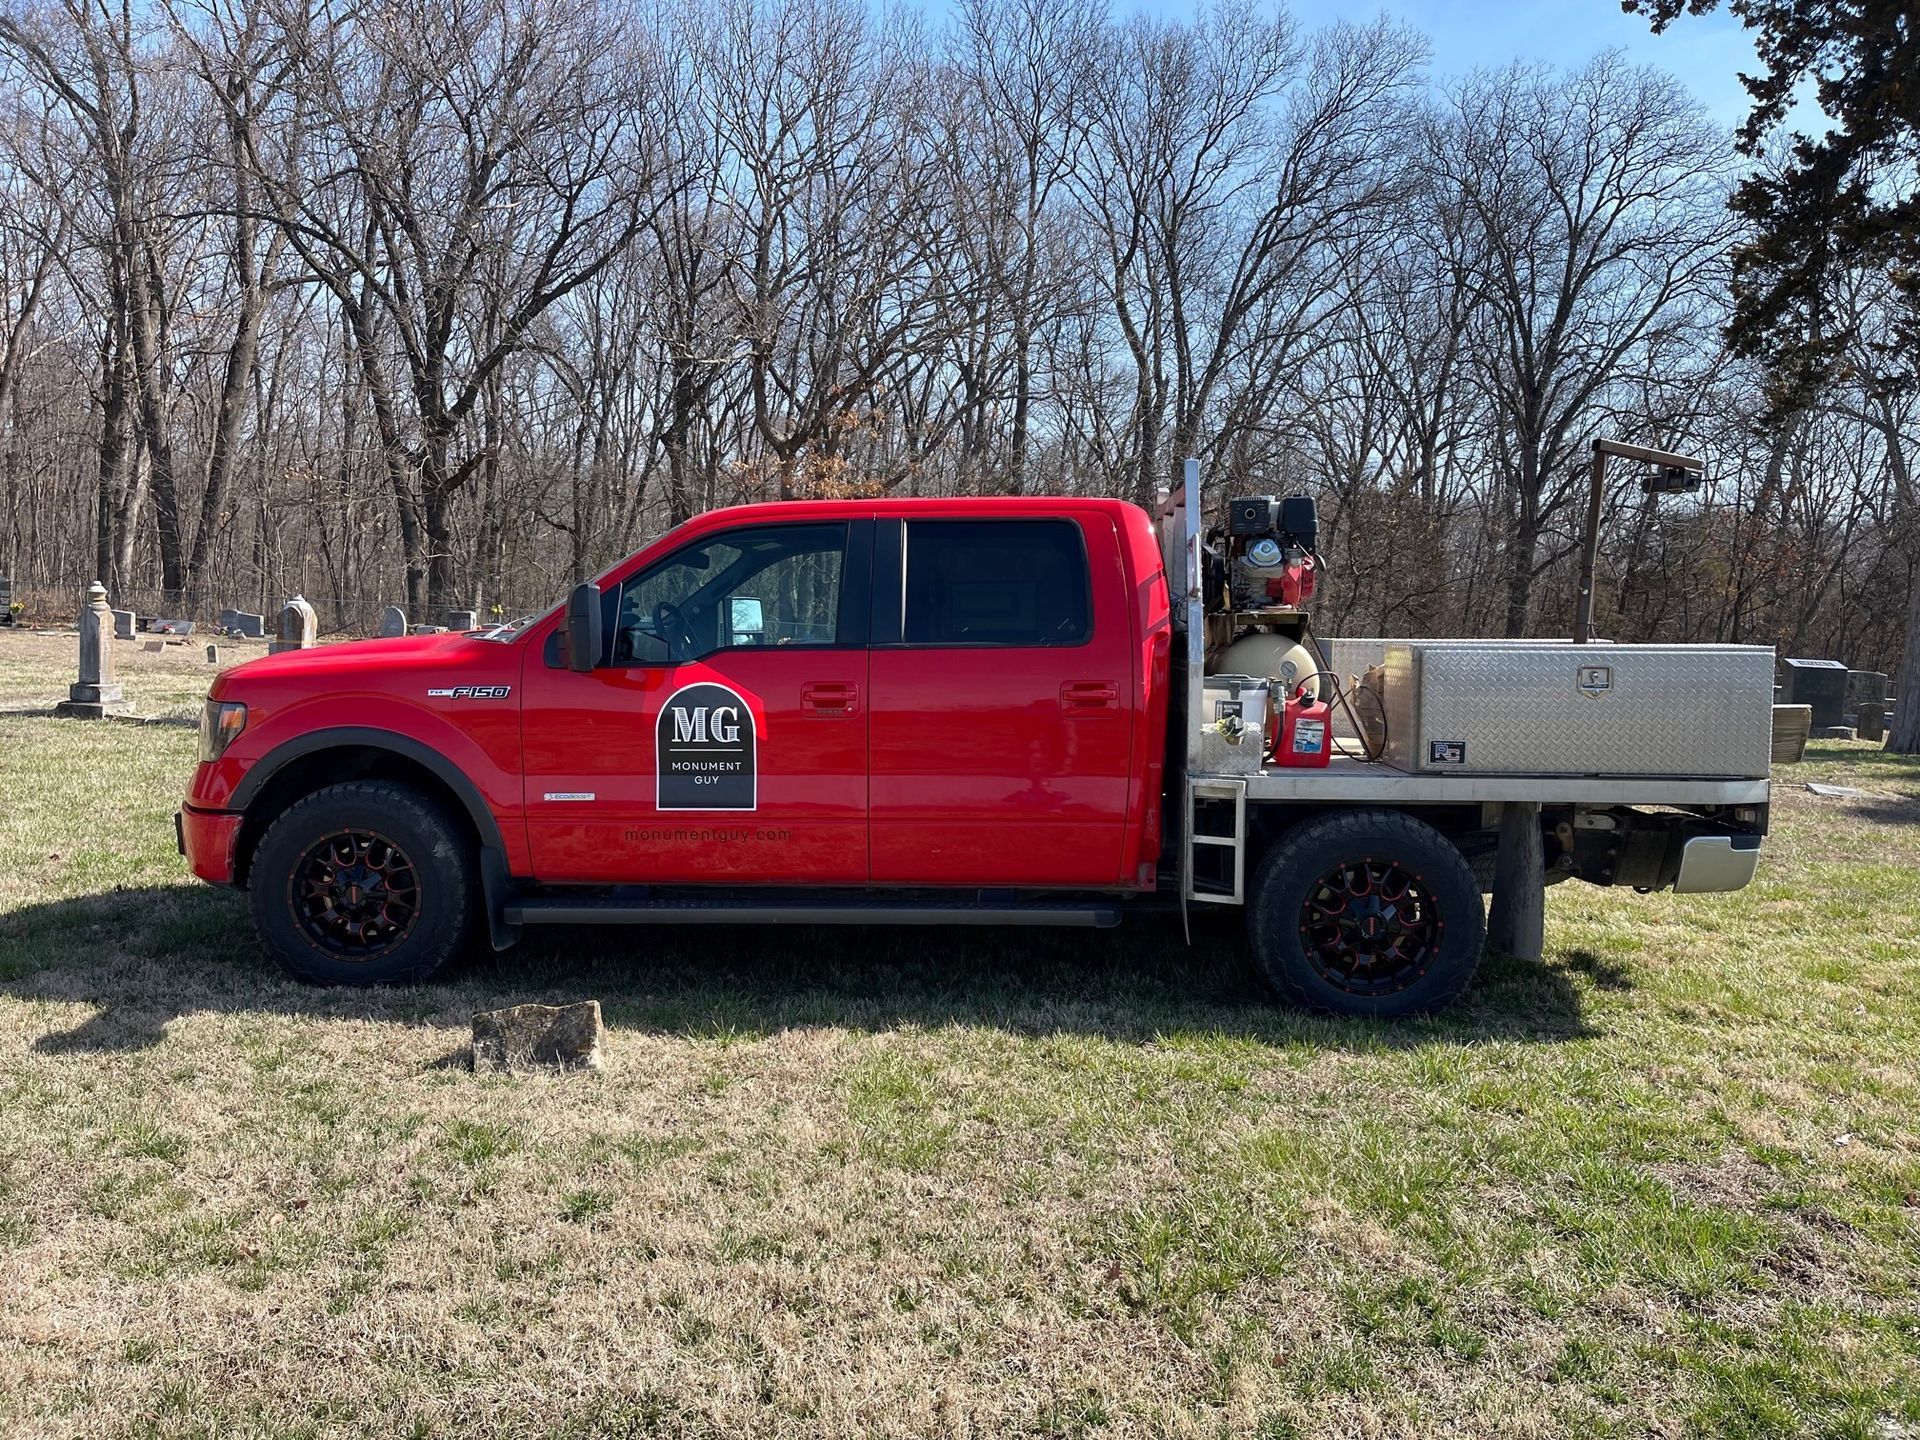 a red truck is parked in a grassy field with trees in the background .